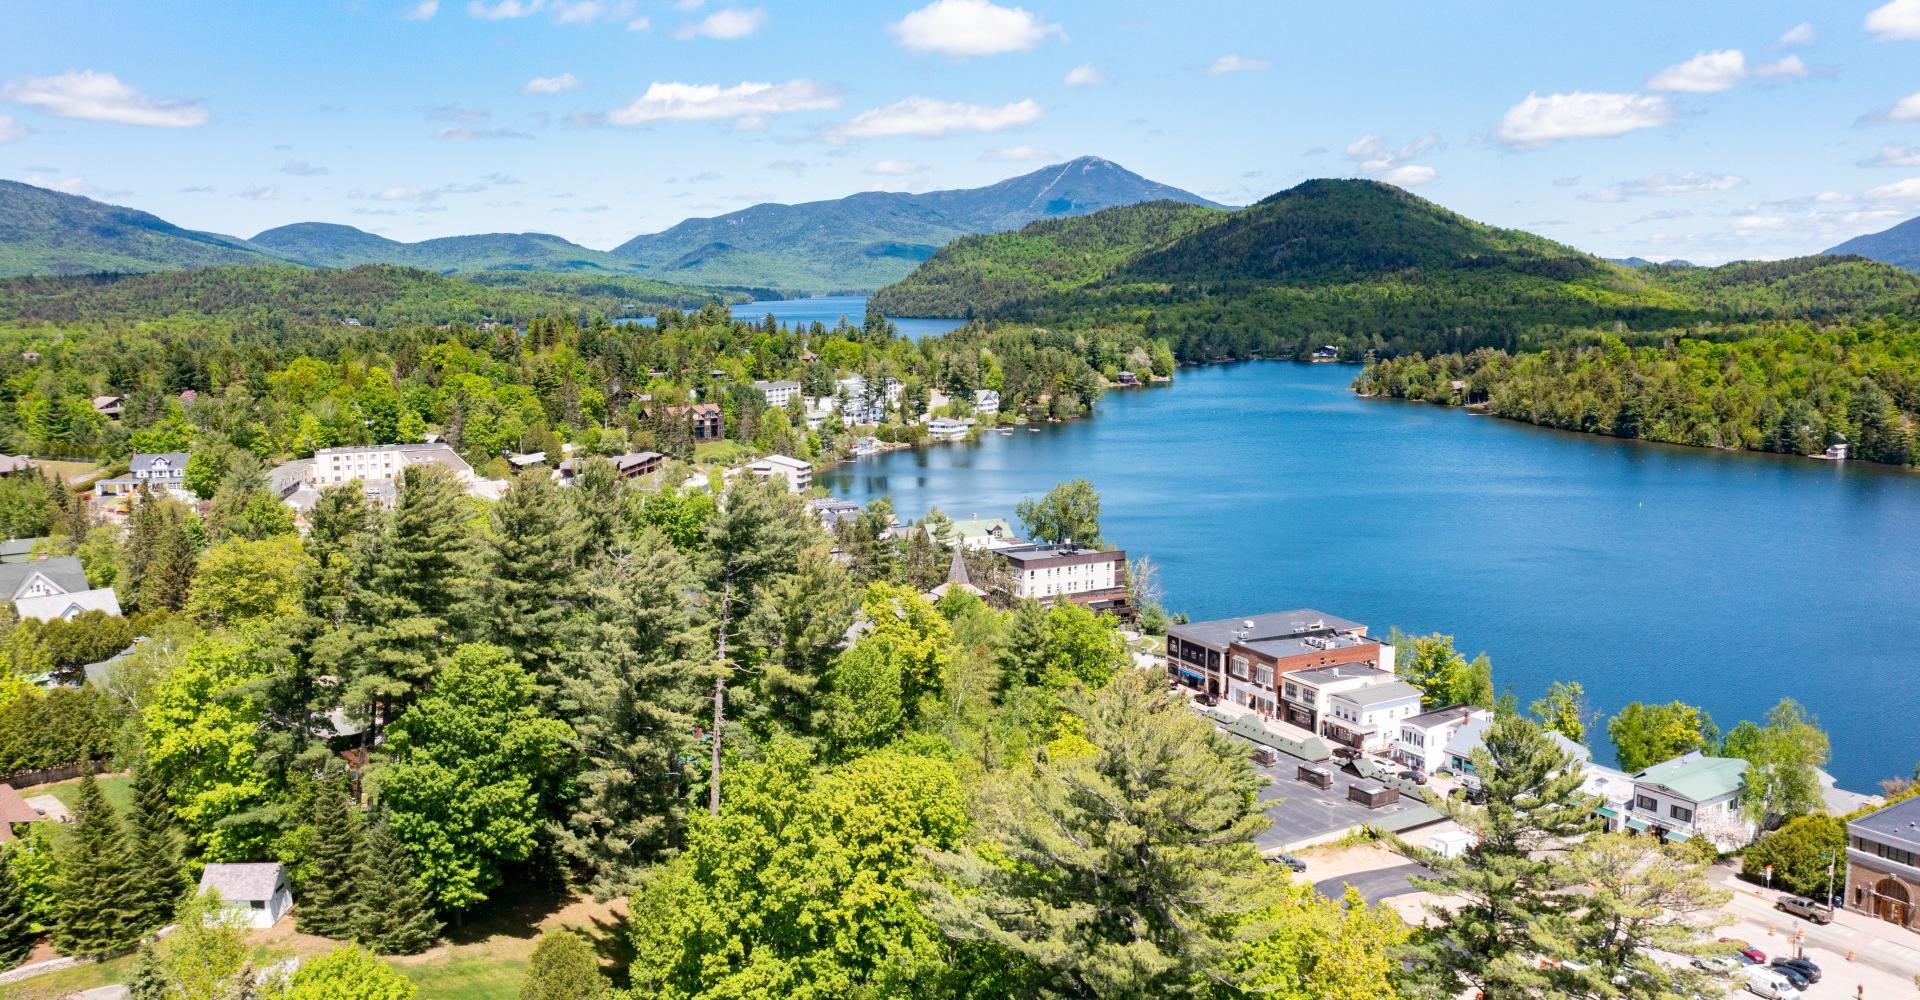  Explore beautiful Lake Placid, two-time host of the Olympic Winter Games. 